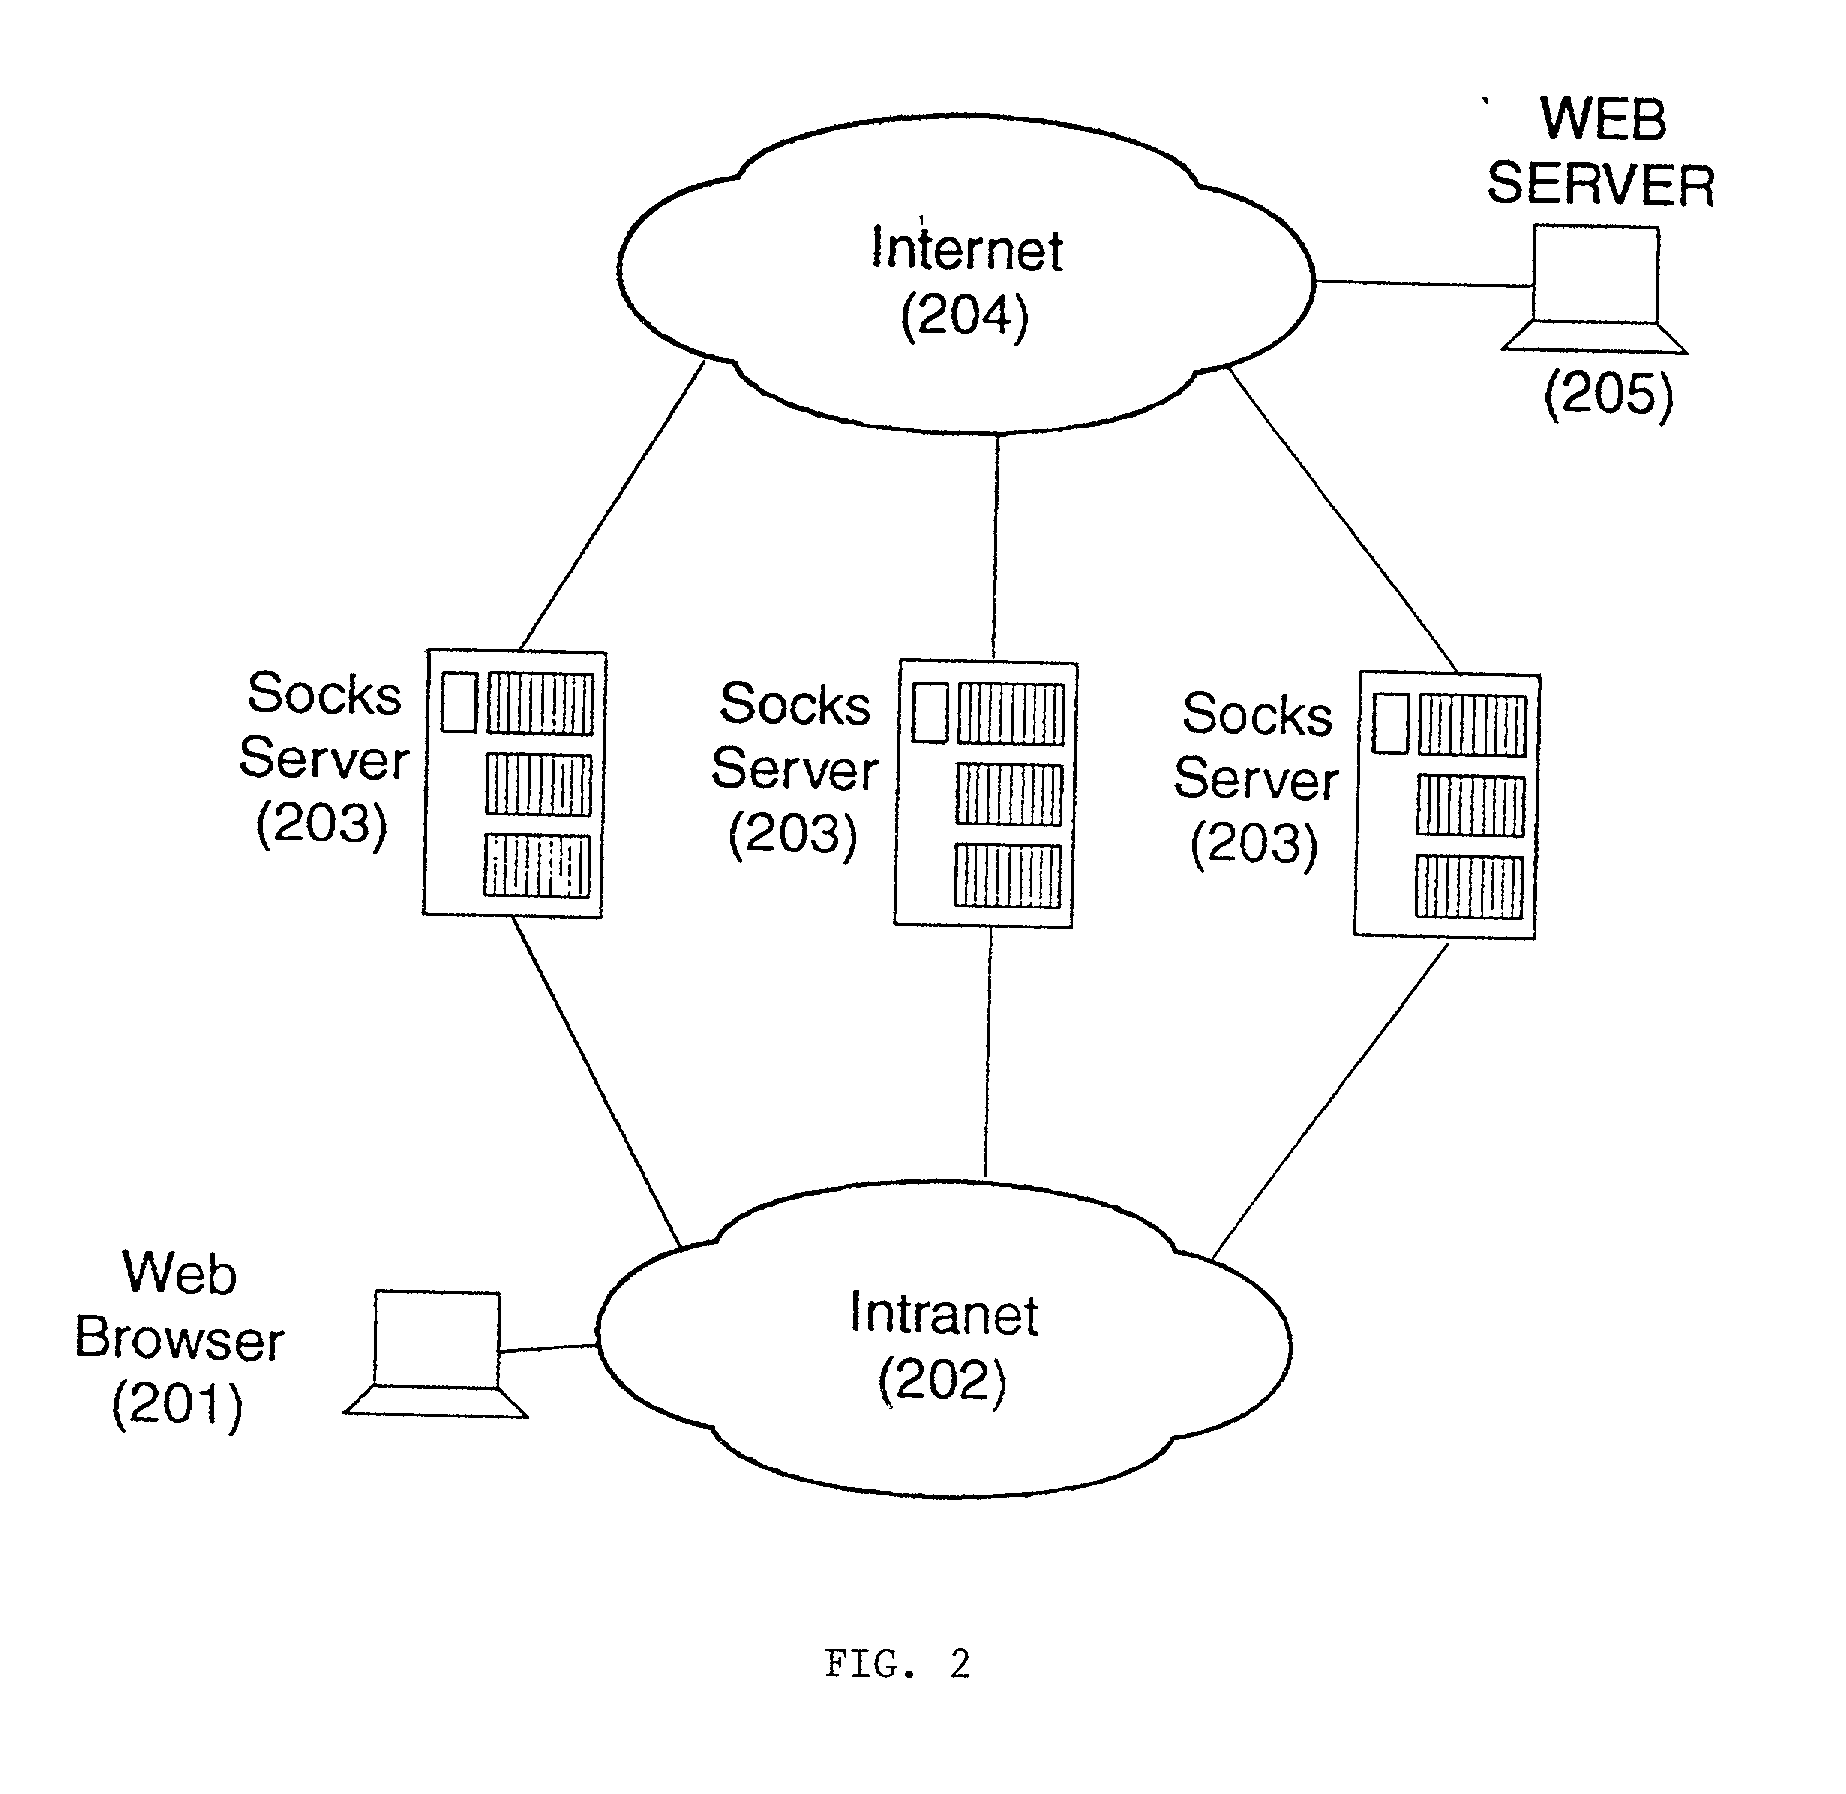 Method and system of dispatching socks traffic using type of service (TOS) field of IP datagrams